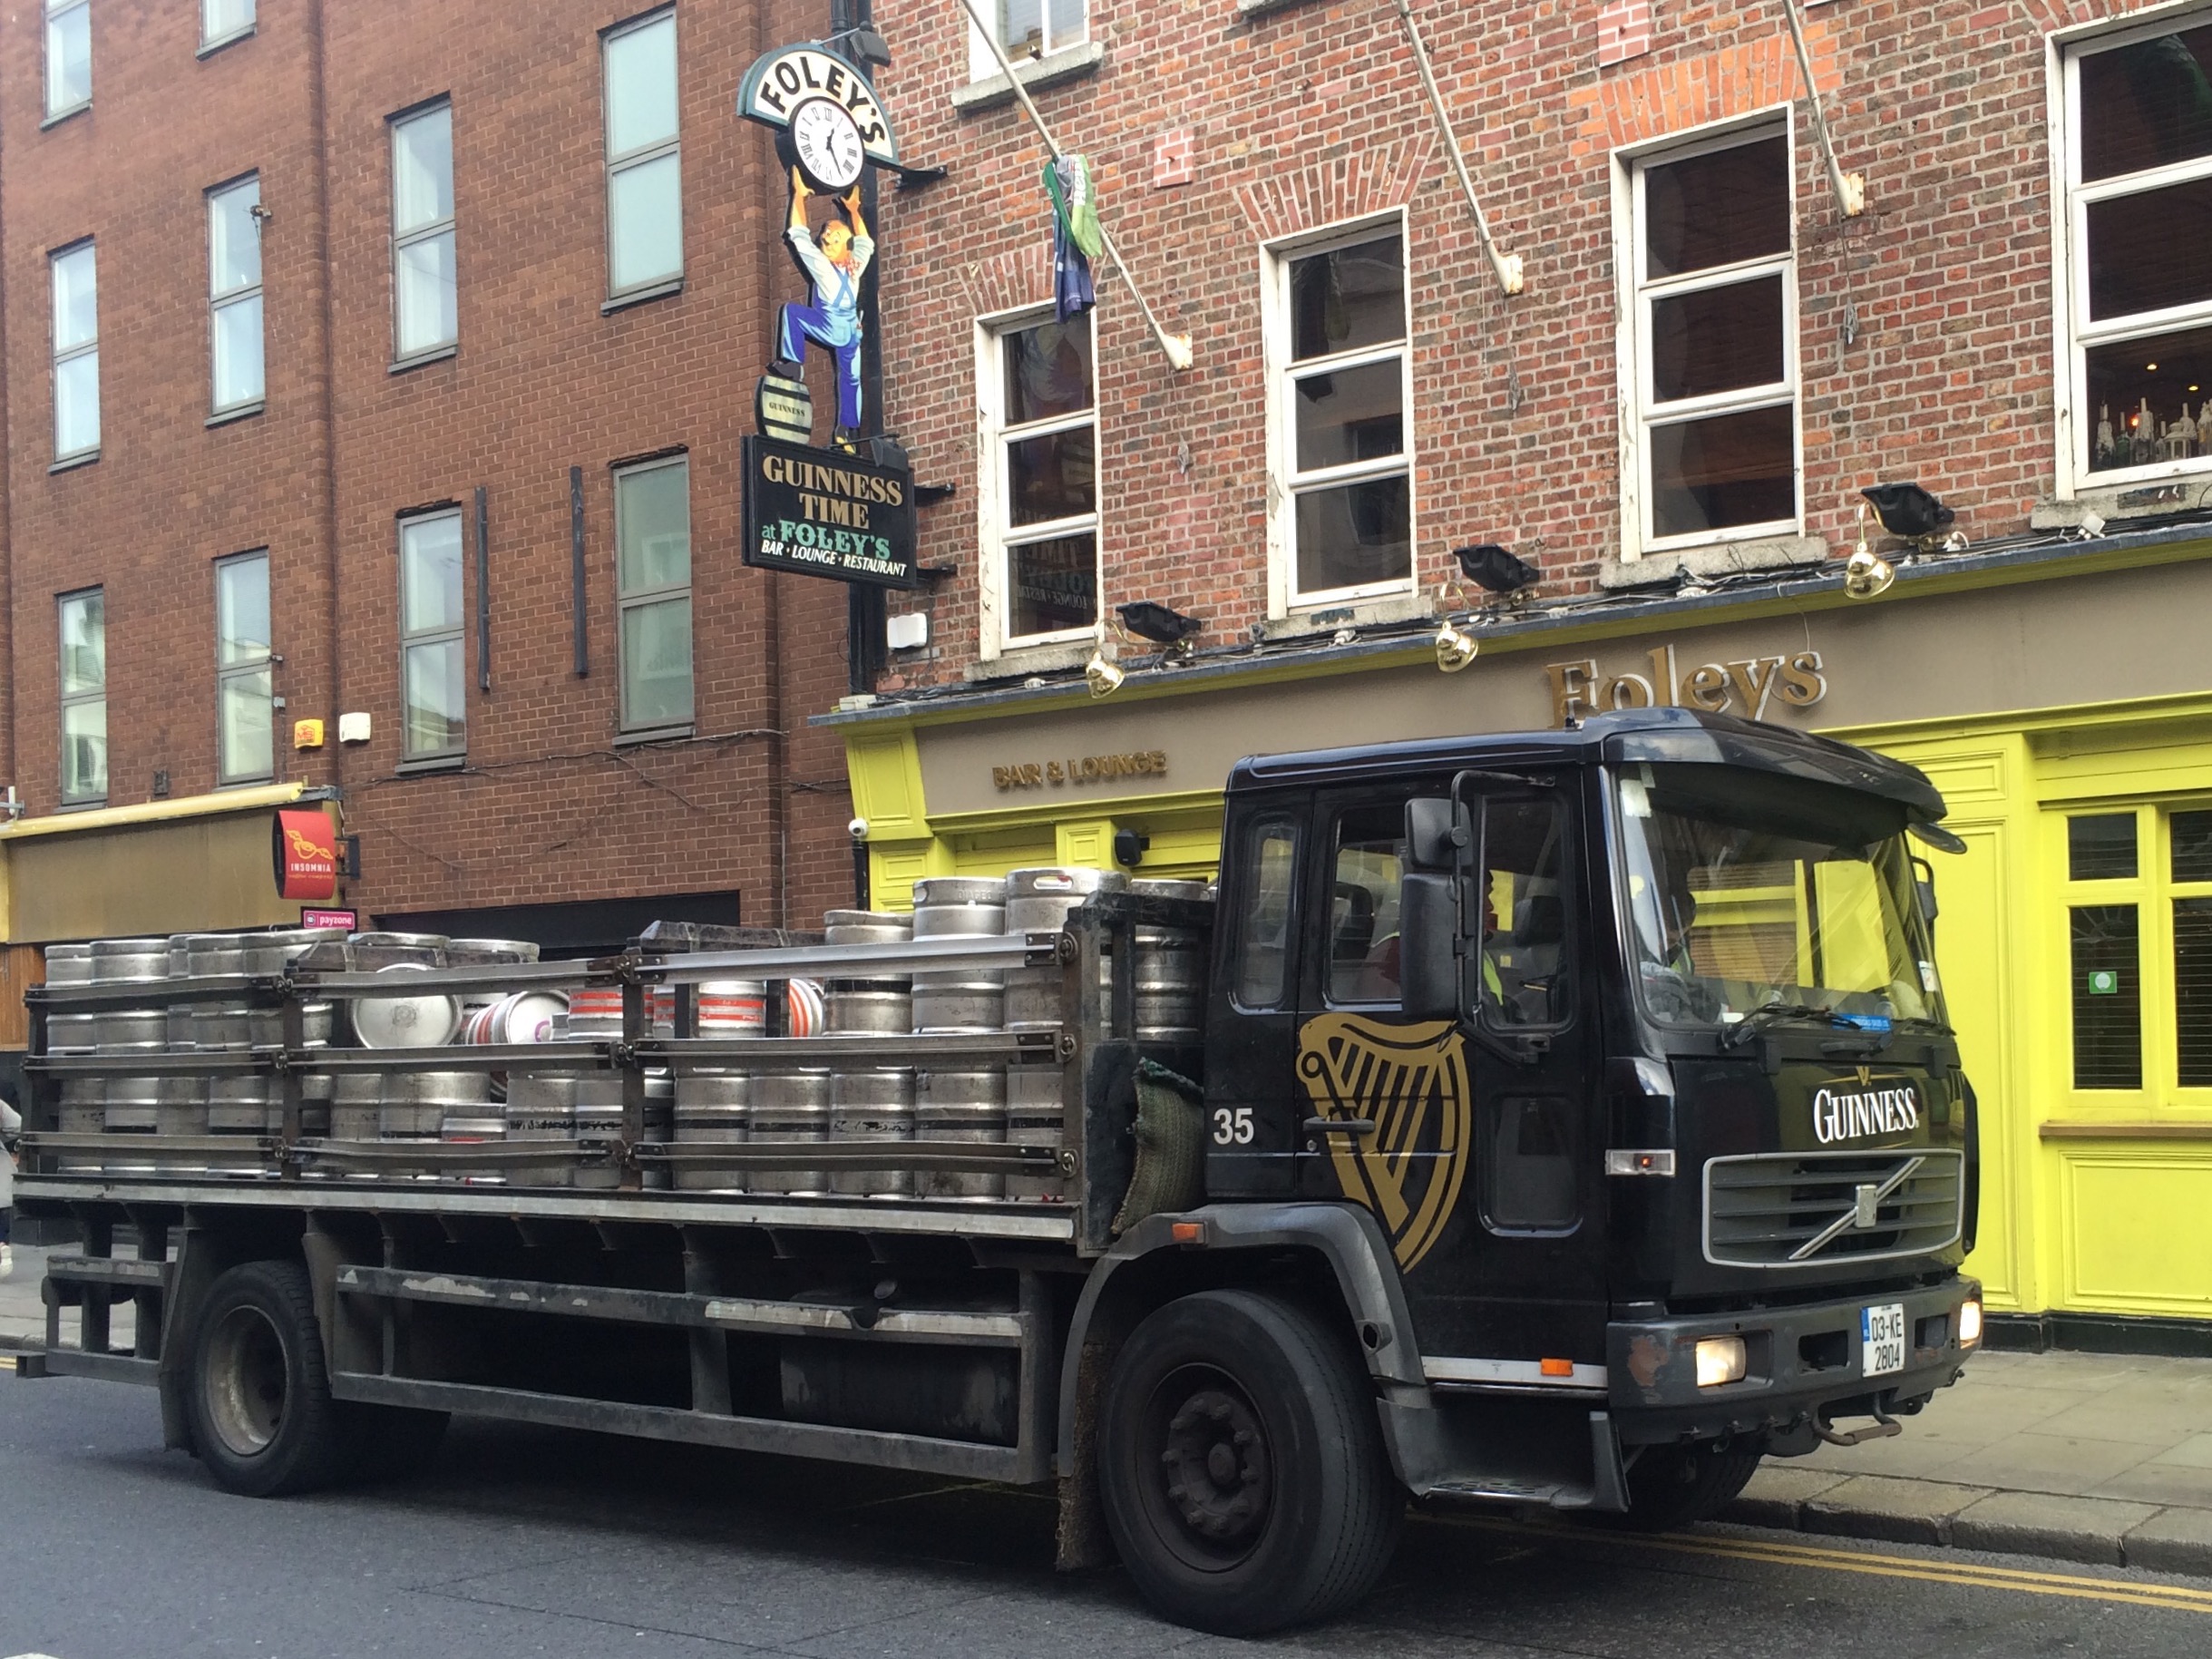 Guinness Delivery Truck in Dublin, Ireland out in front of Foley's.